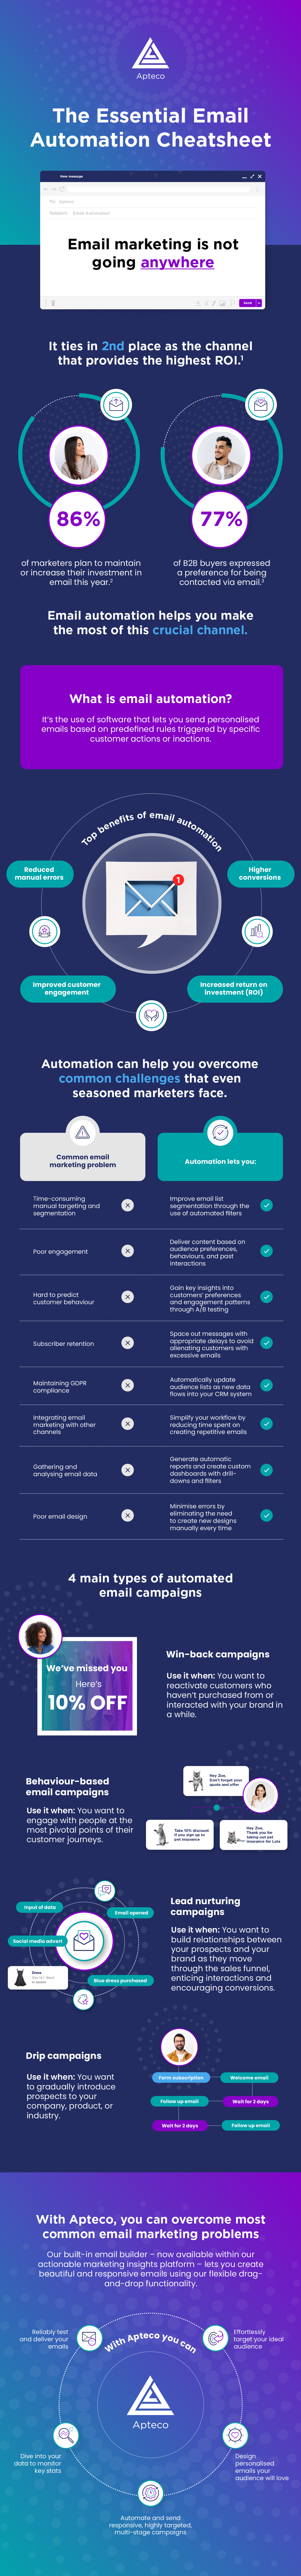 Infographic: The Essential Email Automation Cheatsheet